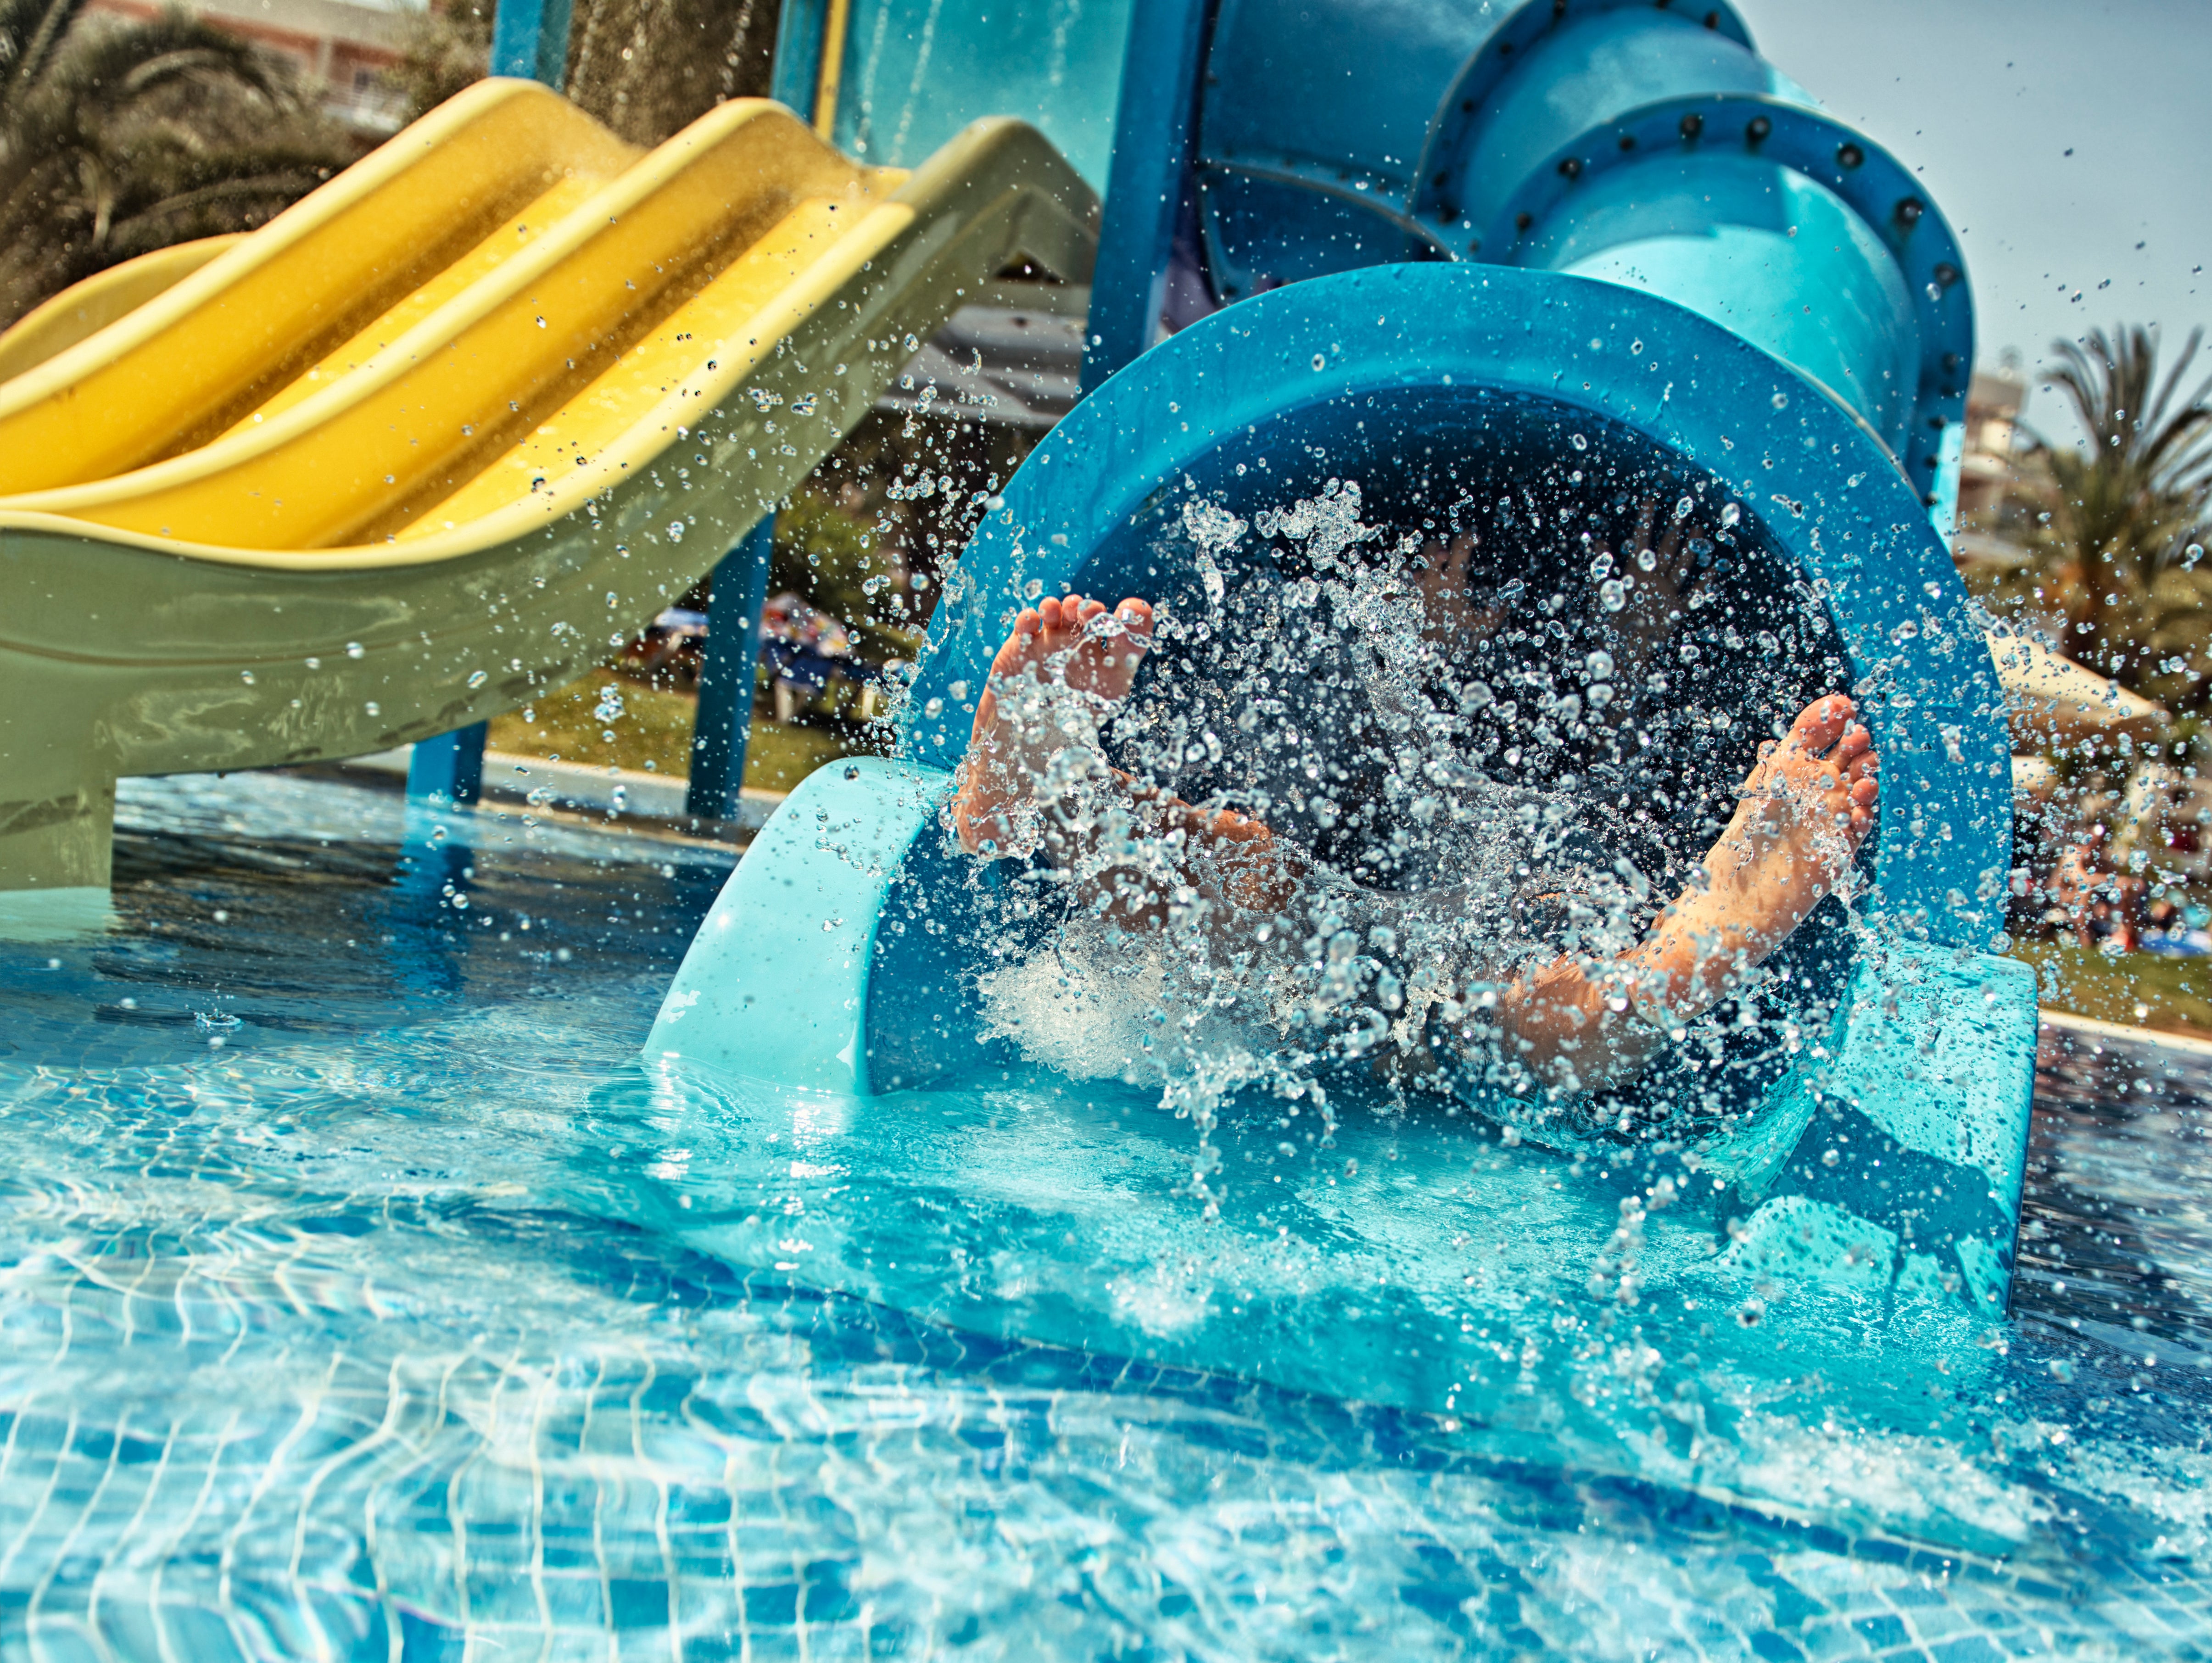 A water slide similar to the on the 13-year-old was denied access to